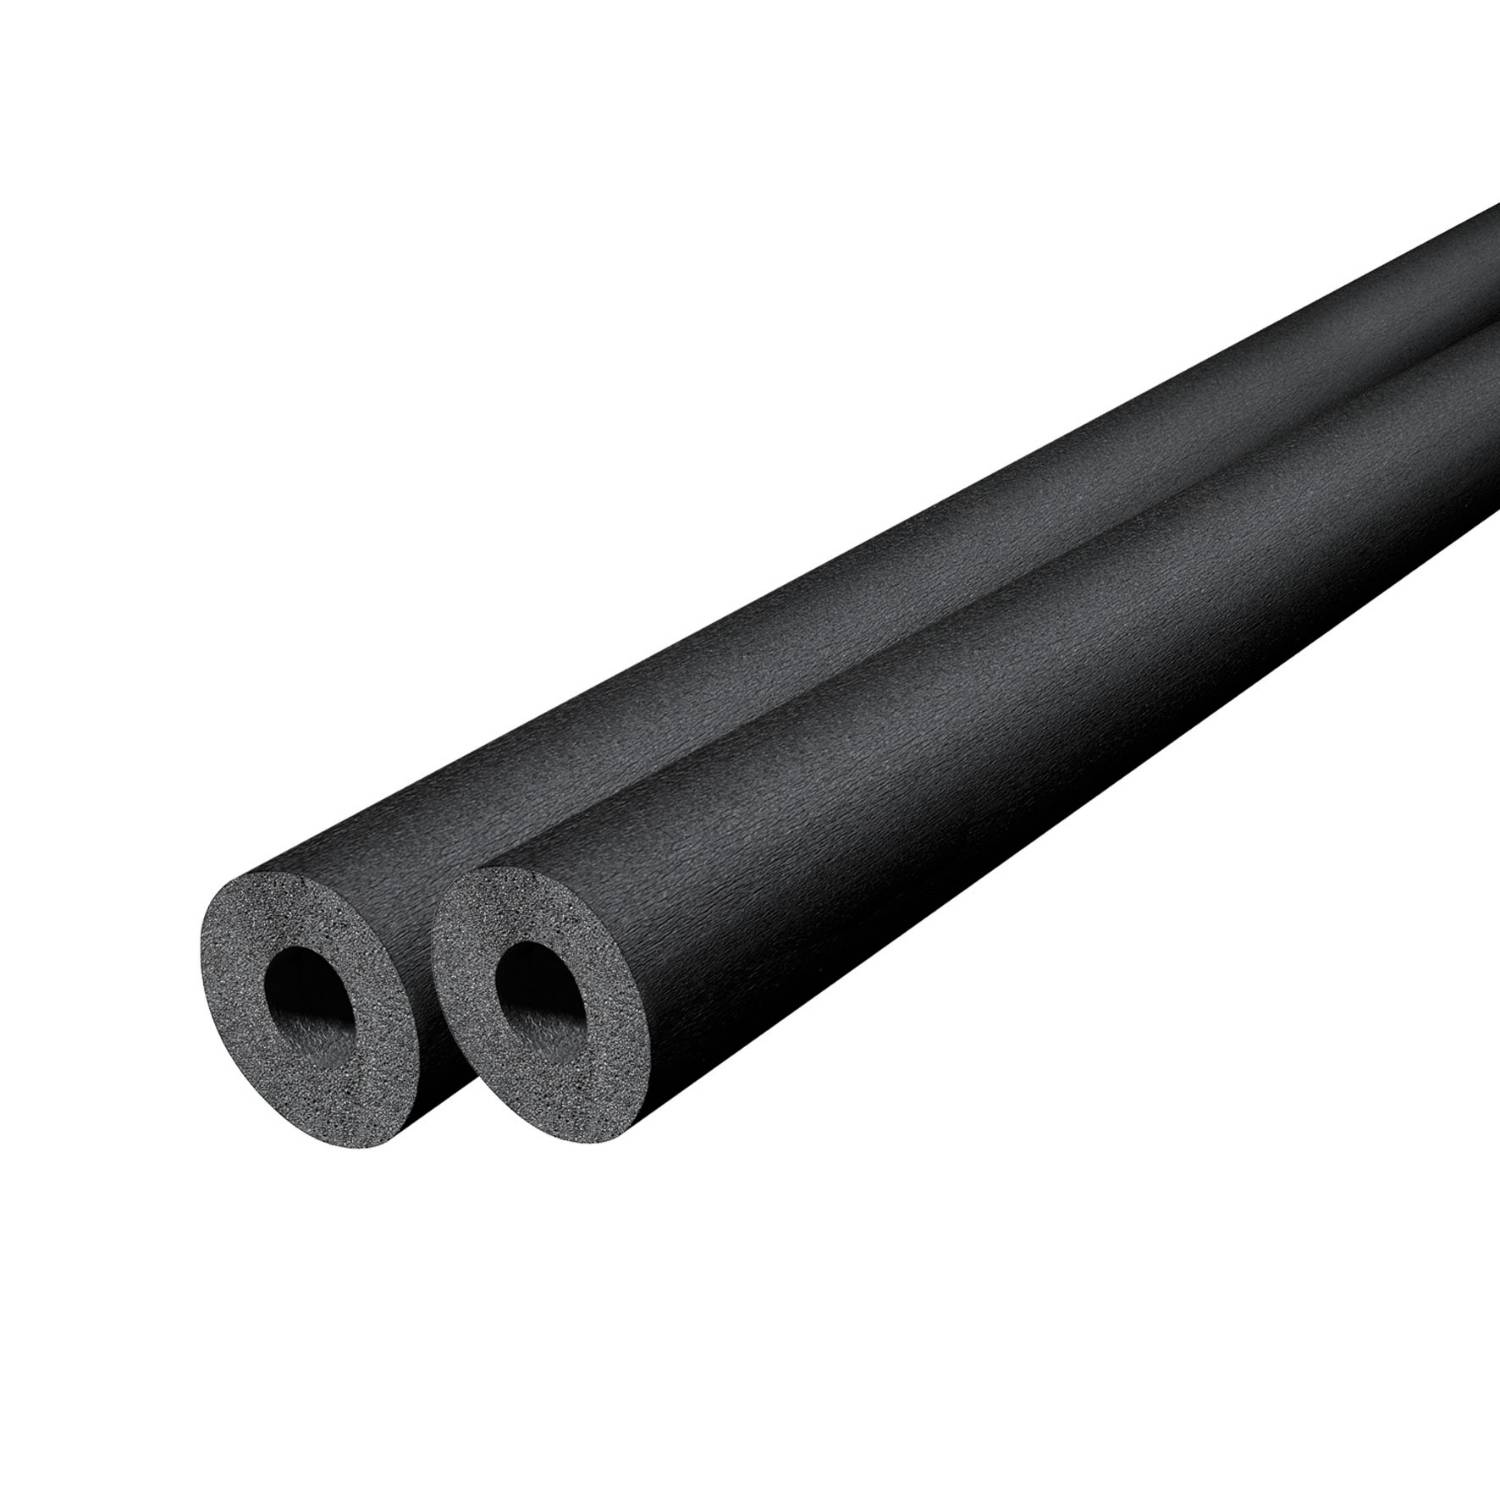 Kaiflex EPDMplus Tubes - Rubber pipe insulation